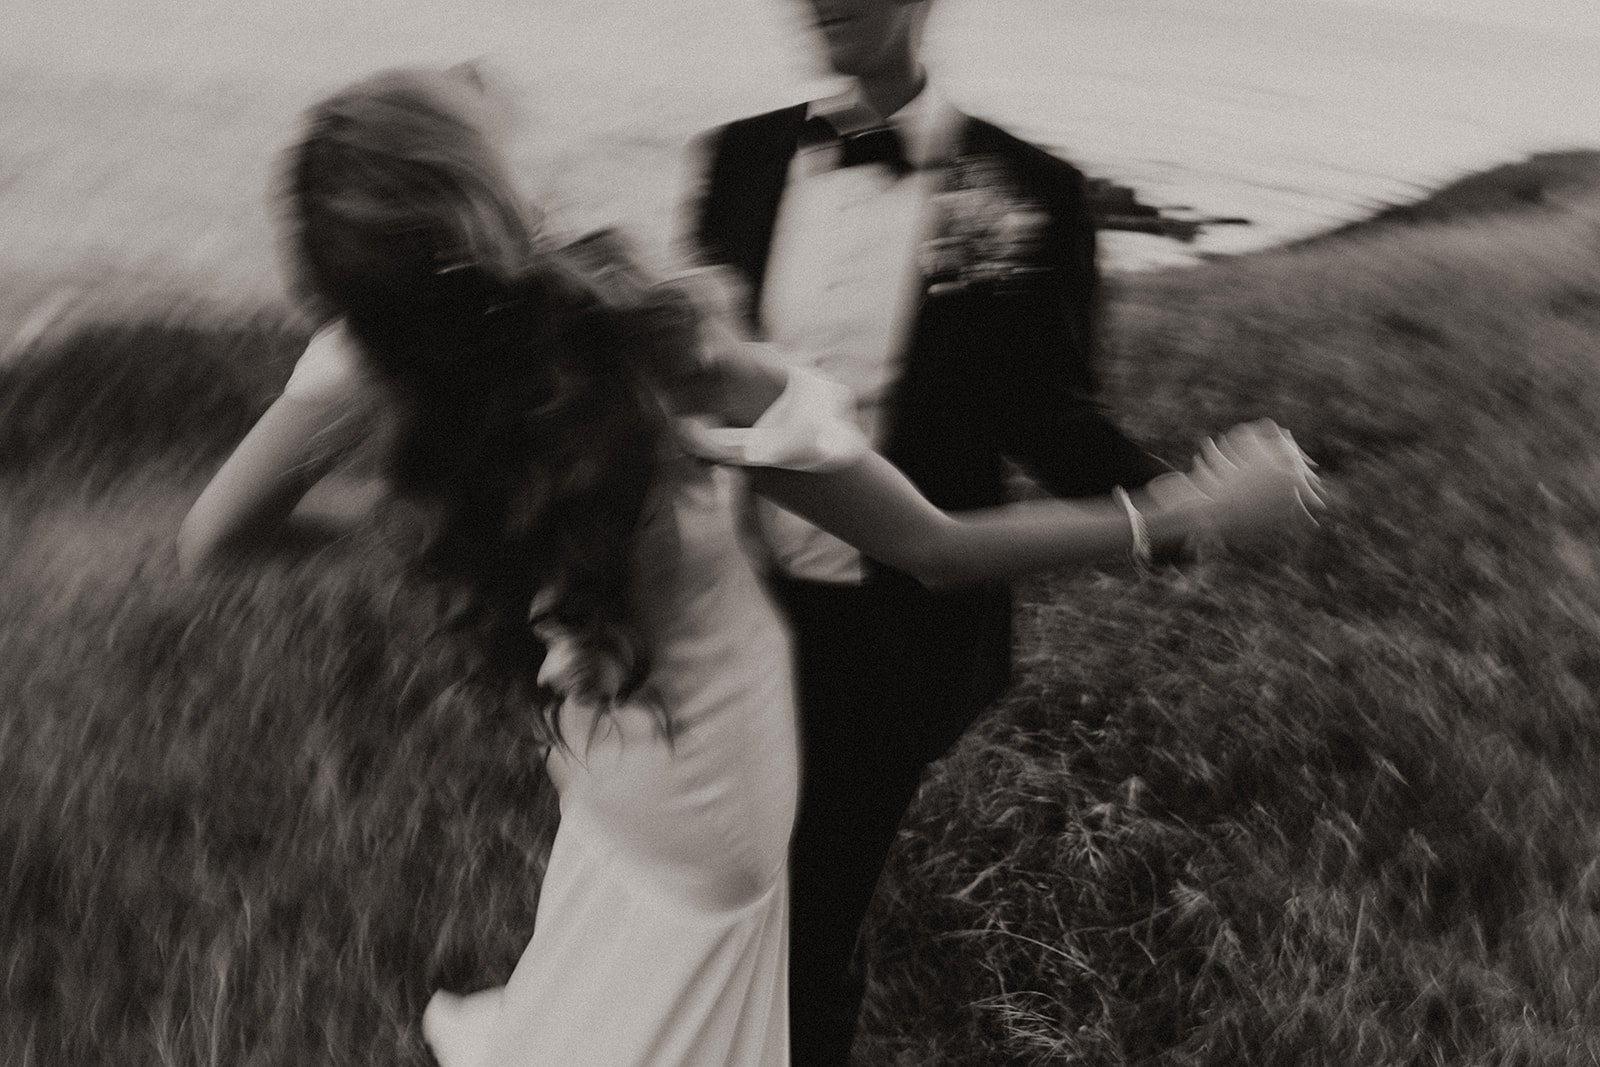 Bride and groom dancing on the coast during sunset in black and white